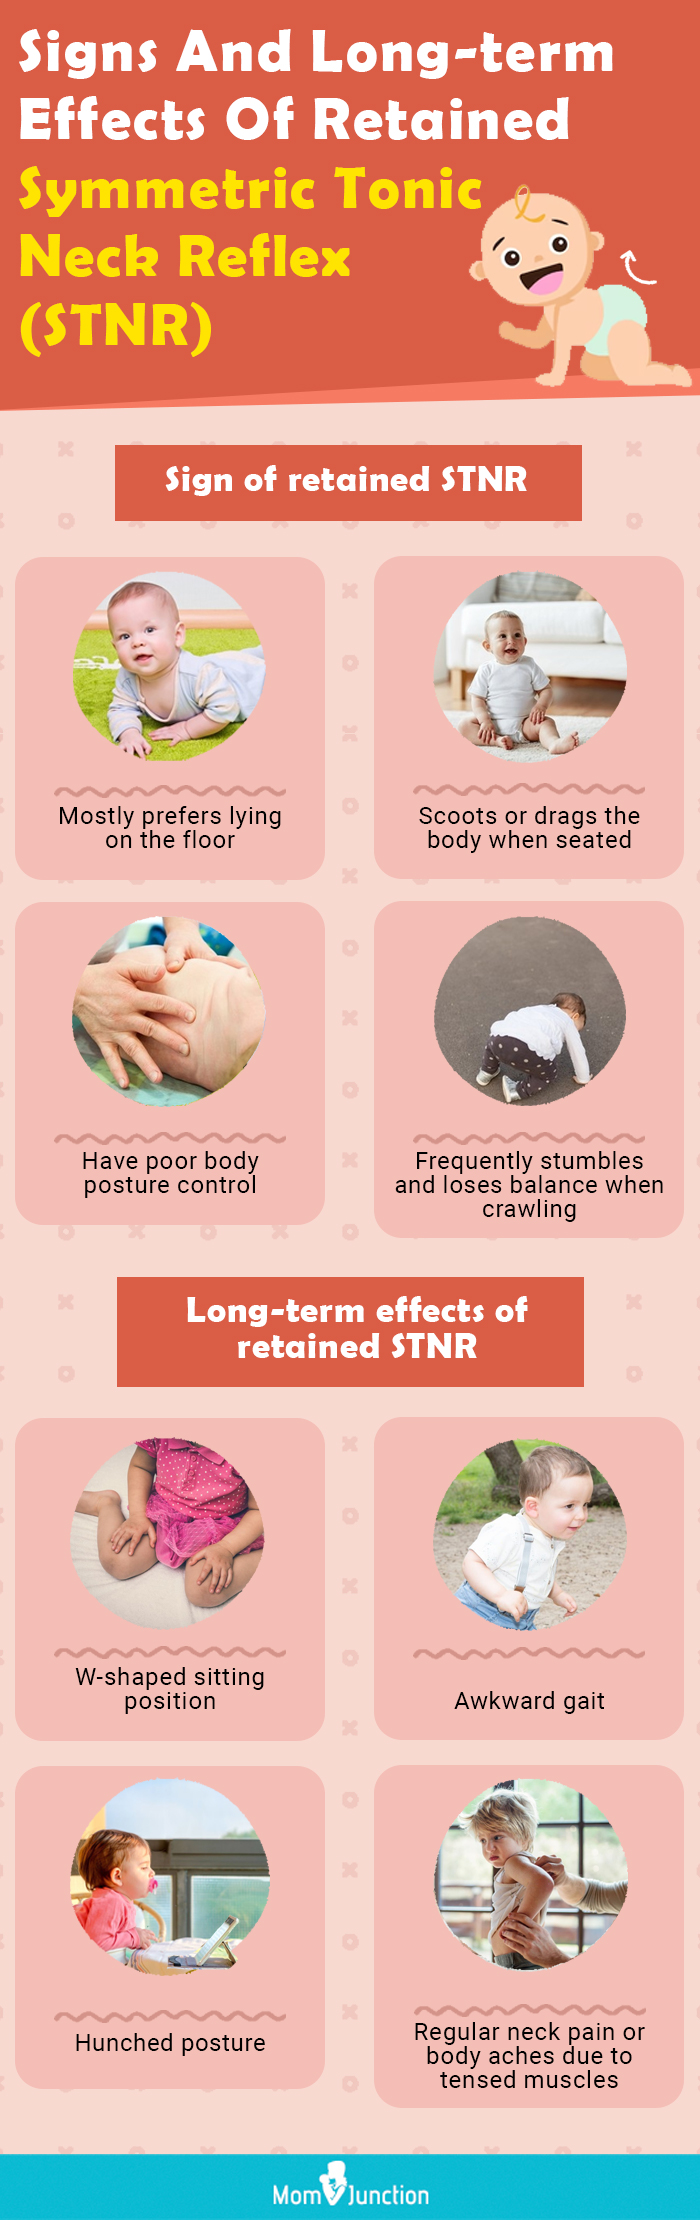 signs and long term effects of retained symmetric tonic neck reflex (stnr) (infographic)